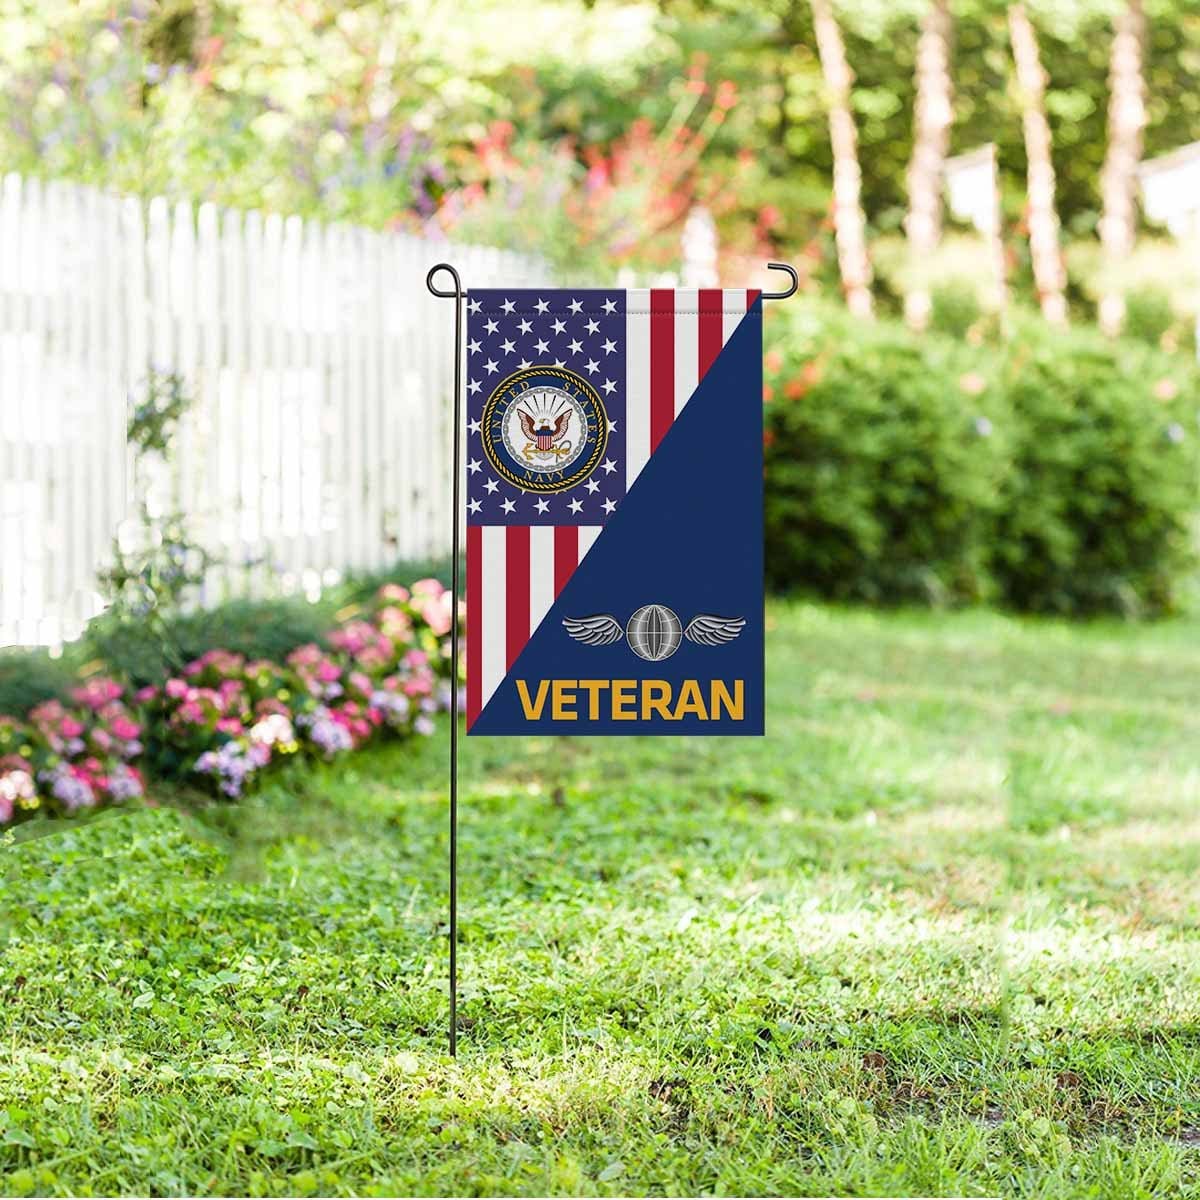 Navy Aviation Electricians Mate Navy AE Veteran Garden Flag/Yard Flag 12 inches x 18 inches Twin-Side Printing-GDFlag-Navy-Rate-Veterans Nation